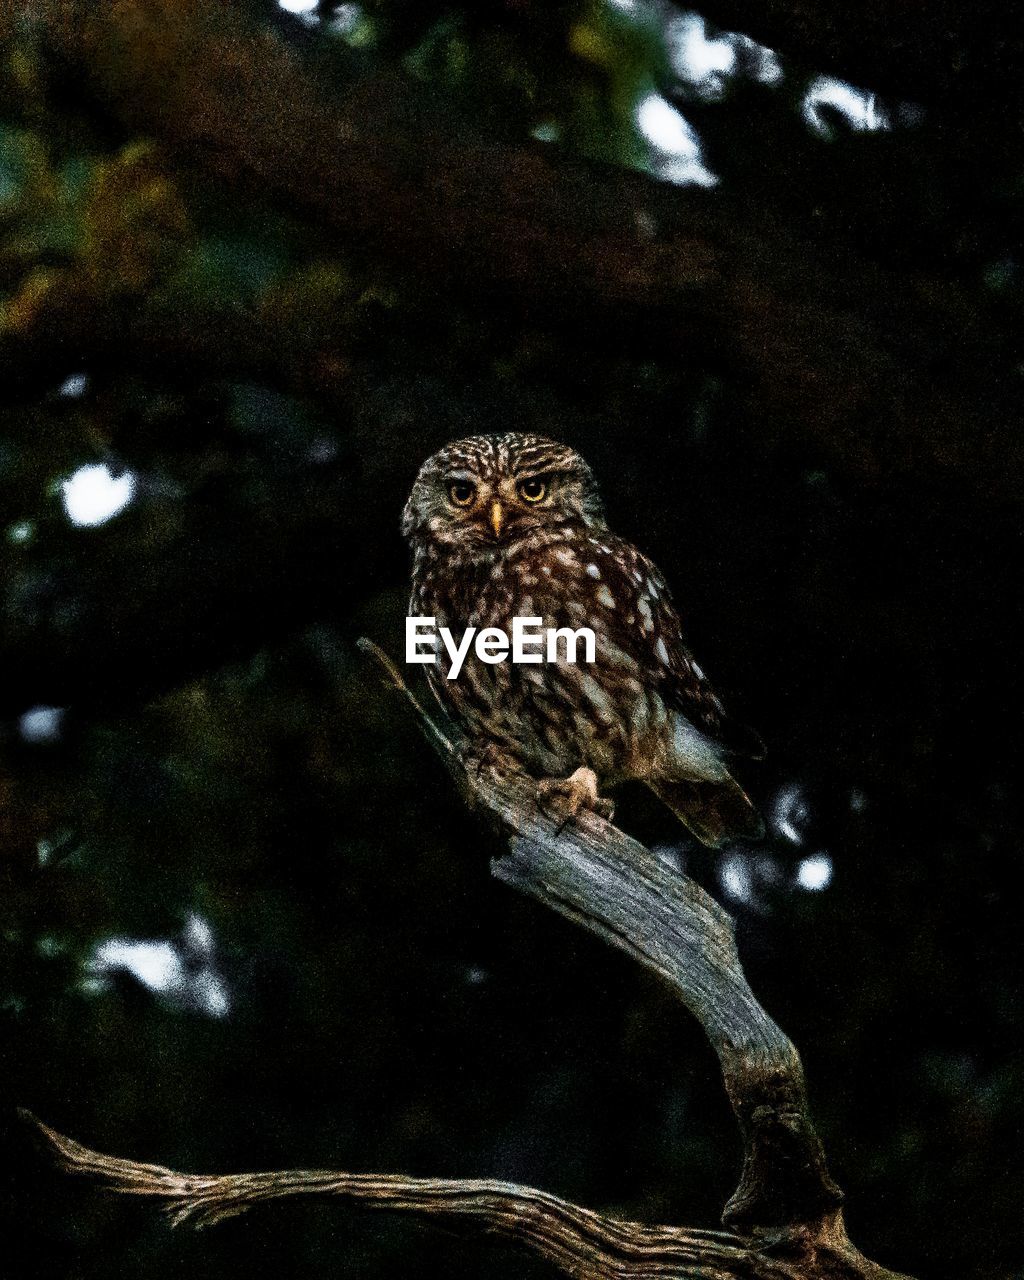 Little owl perched in a tree in woods